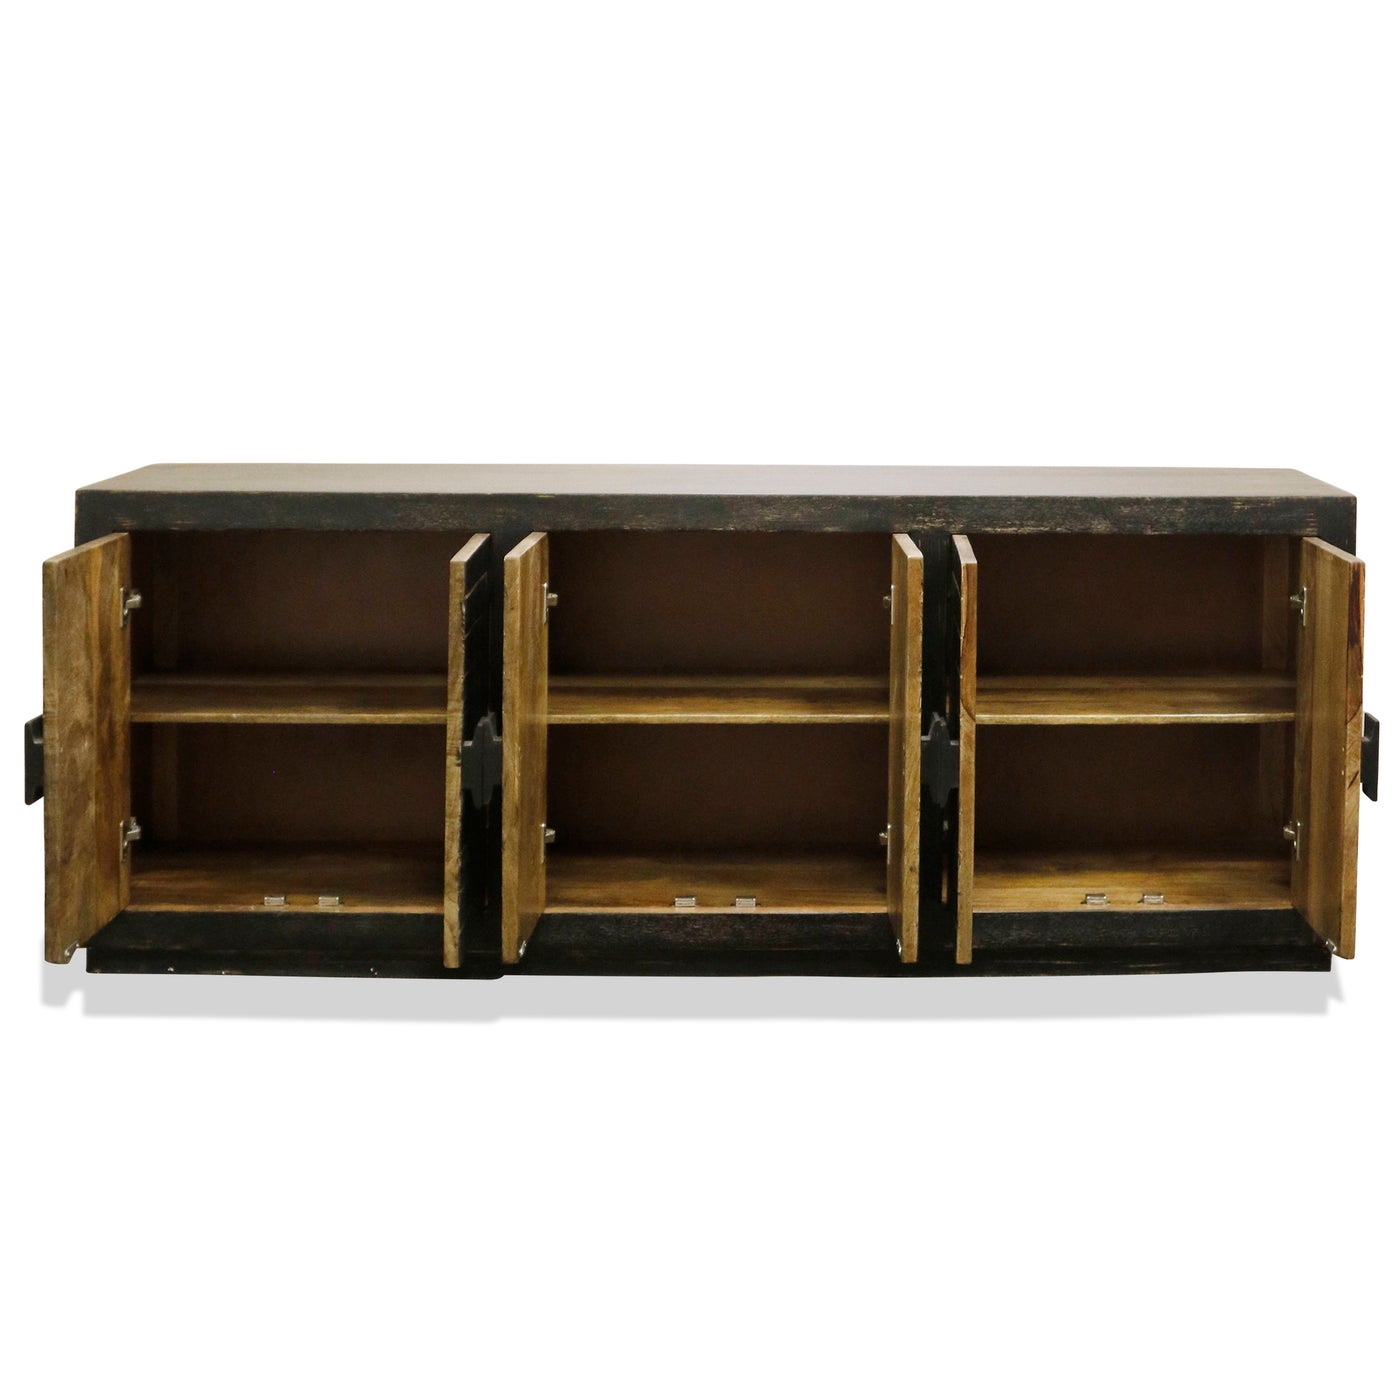 BRITTON SIDEBOARD | Solid Mango Wood With Black Brushed Finish | Six Doors